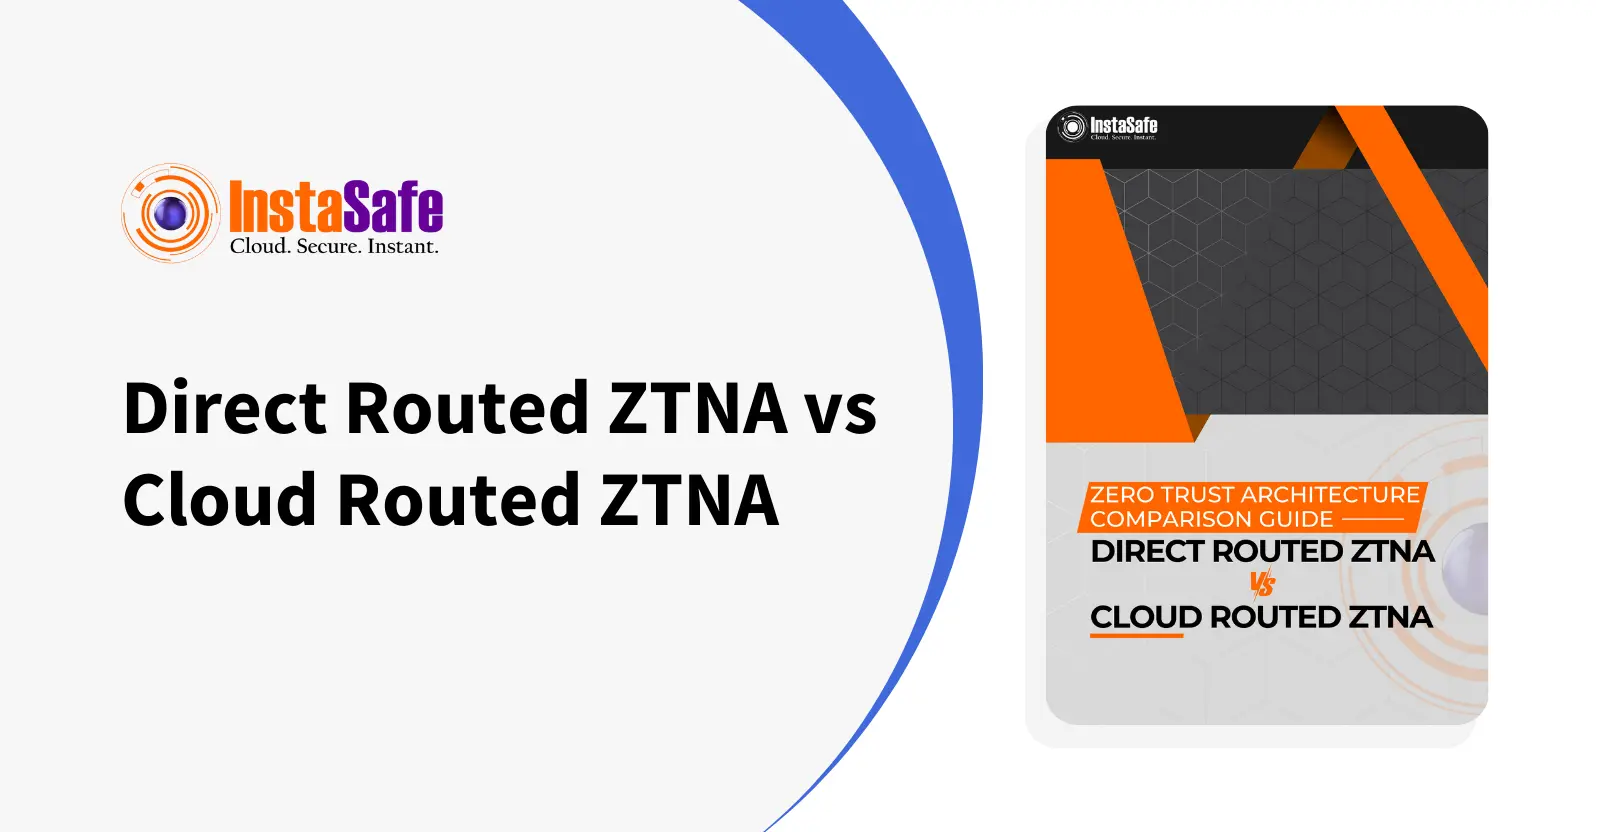 Direct Routed ZTNA vs Cloud Routed ZTNA